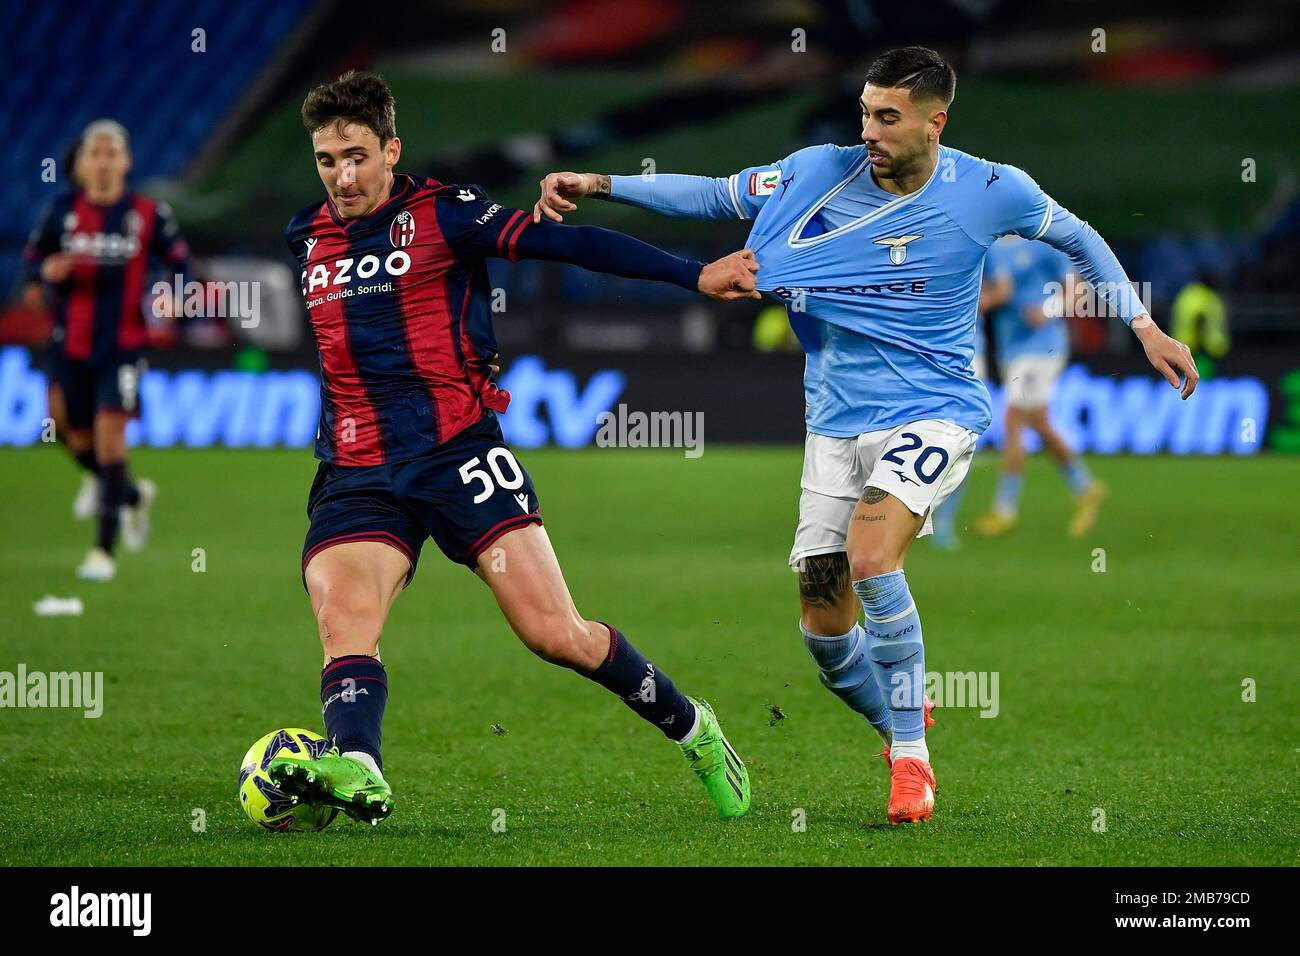 Andrea Cambiaso of Bologna FC and Mattia Zaccagni of SS Lazio compete for the ball during the Italy Cup football match between SS Lazio and Bologna FC Stock Photo